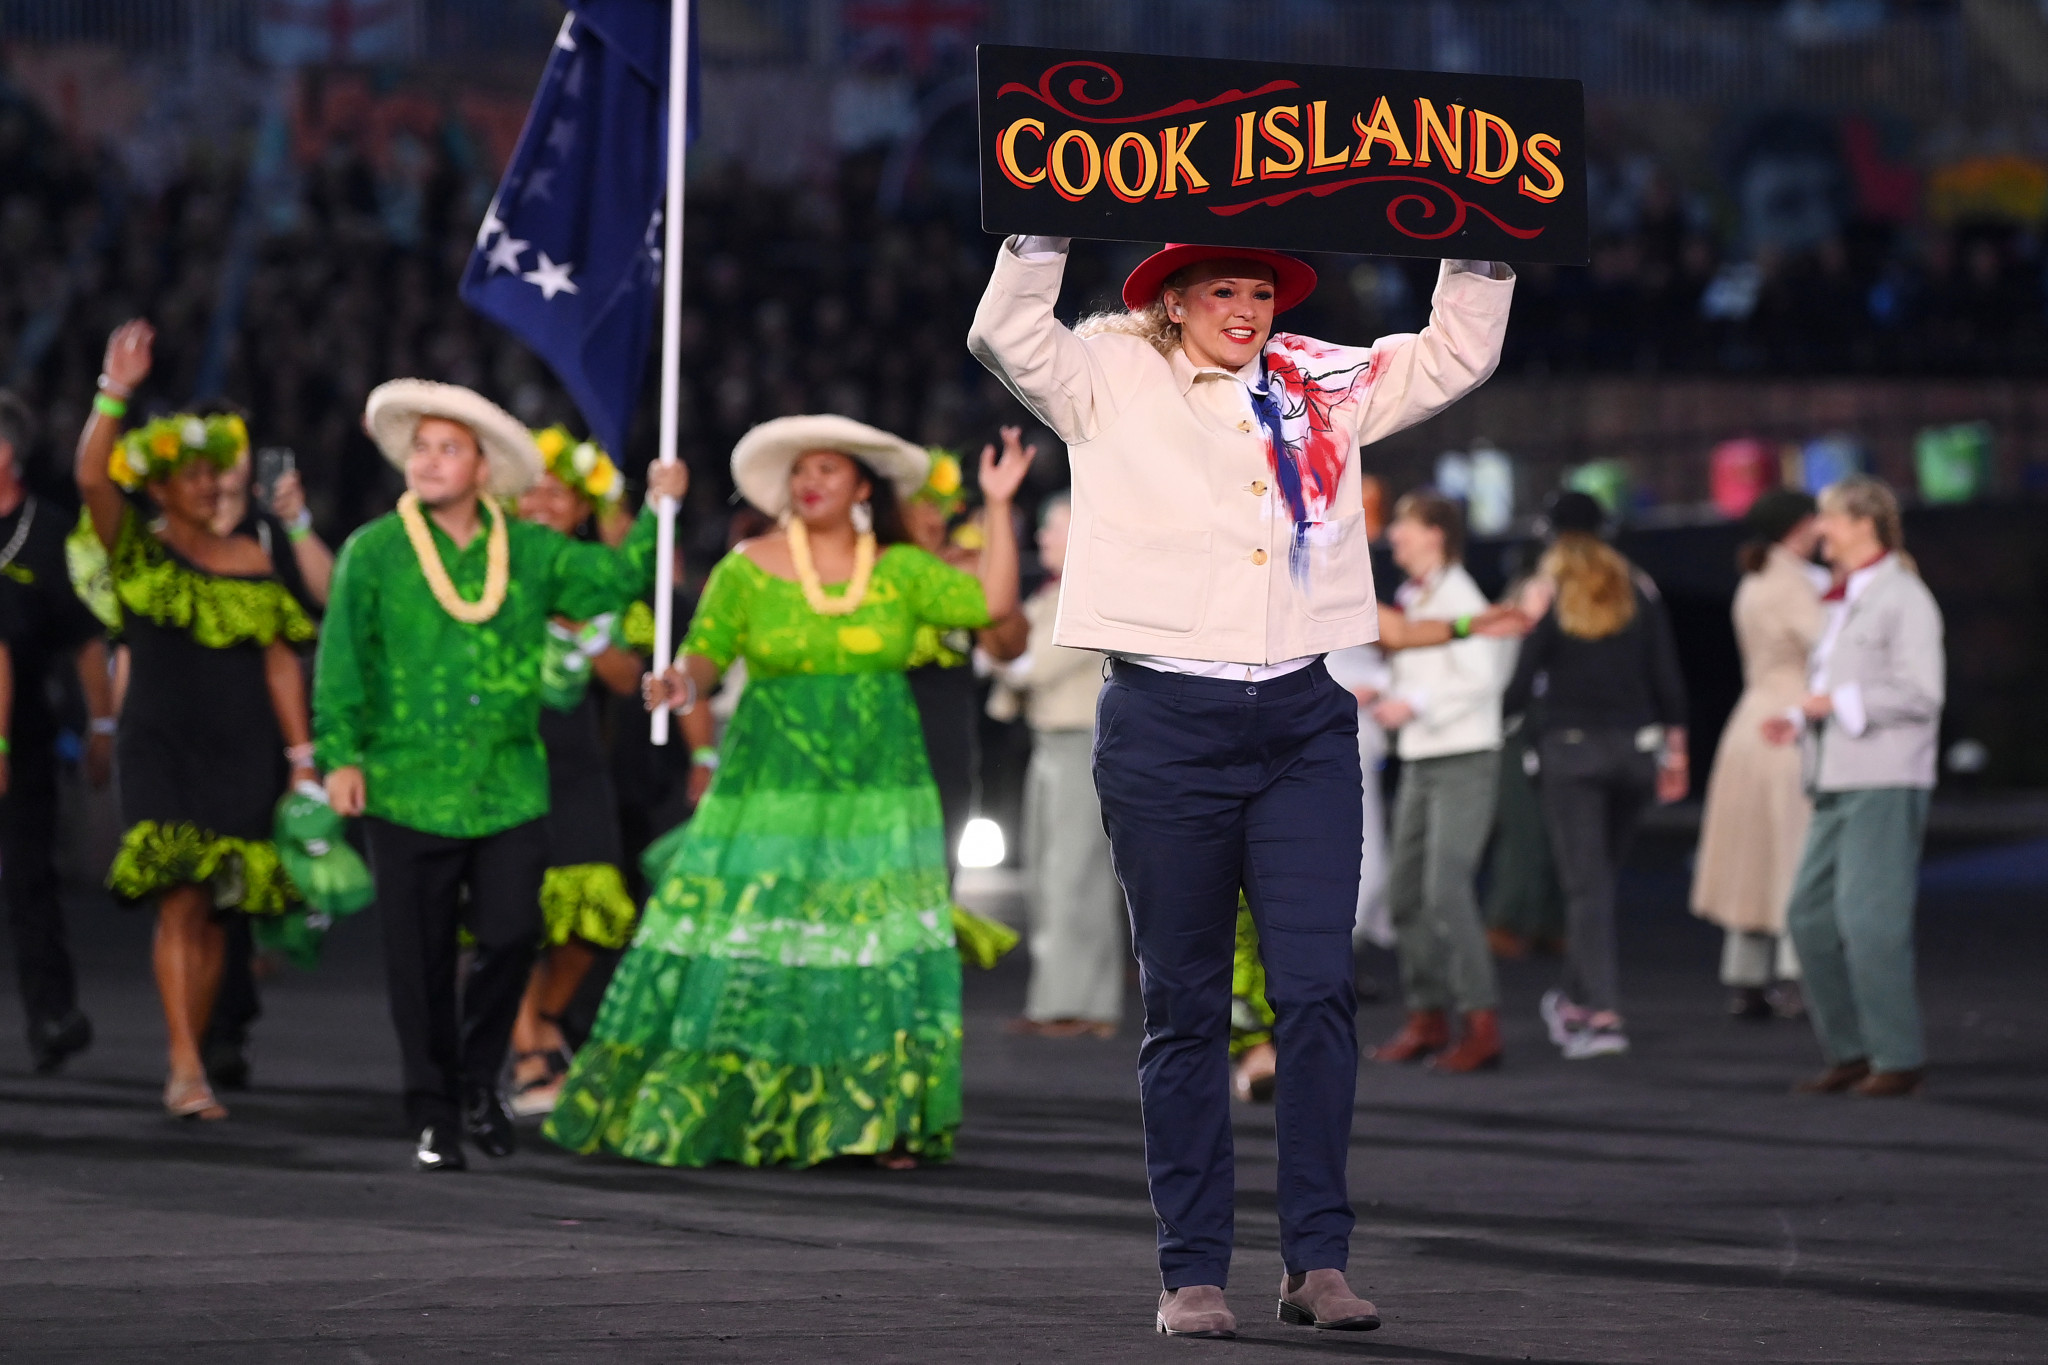 Cook Islands Sports and National Olympic Committee hoping for "positive" 2023